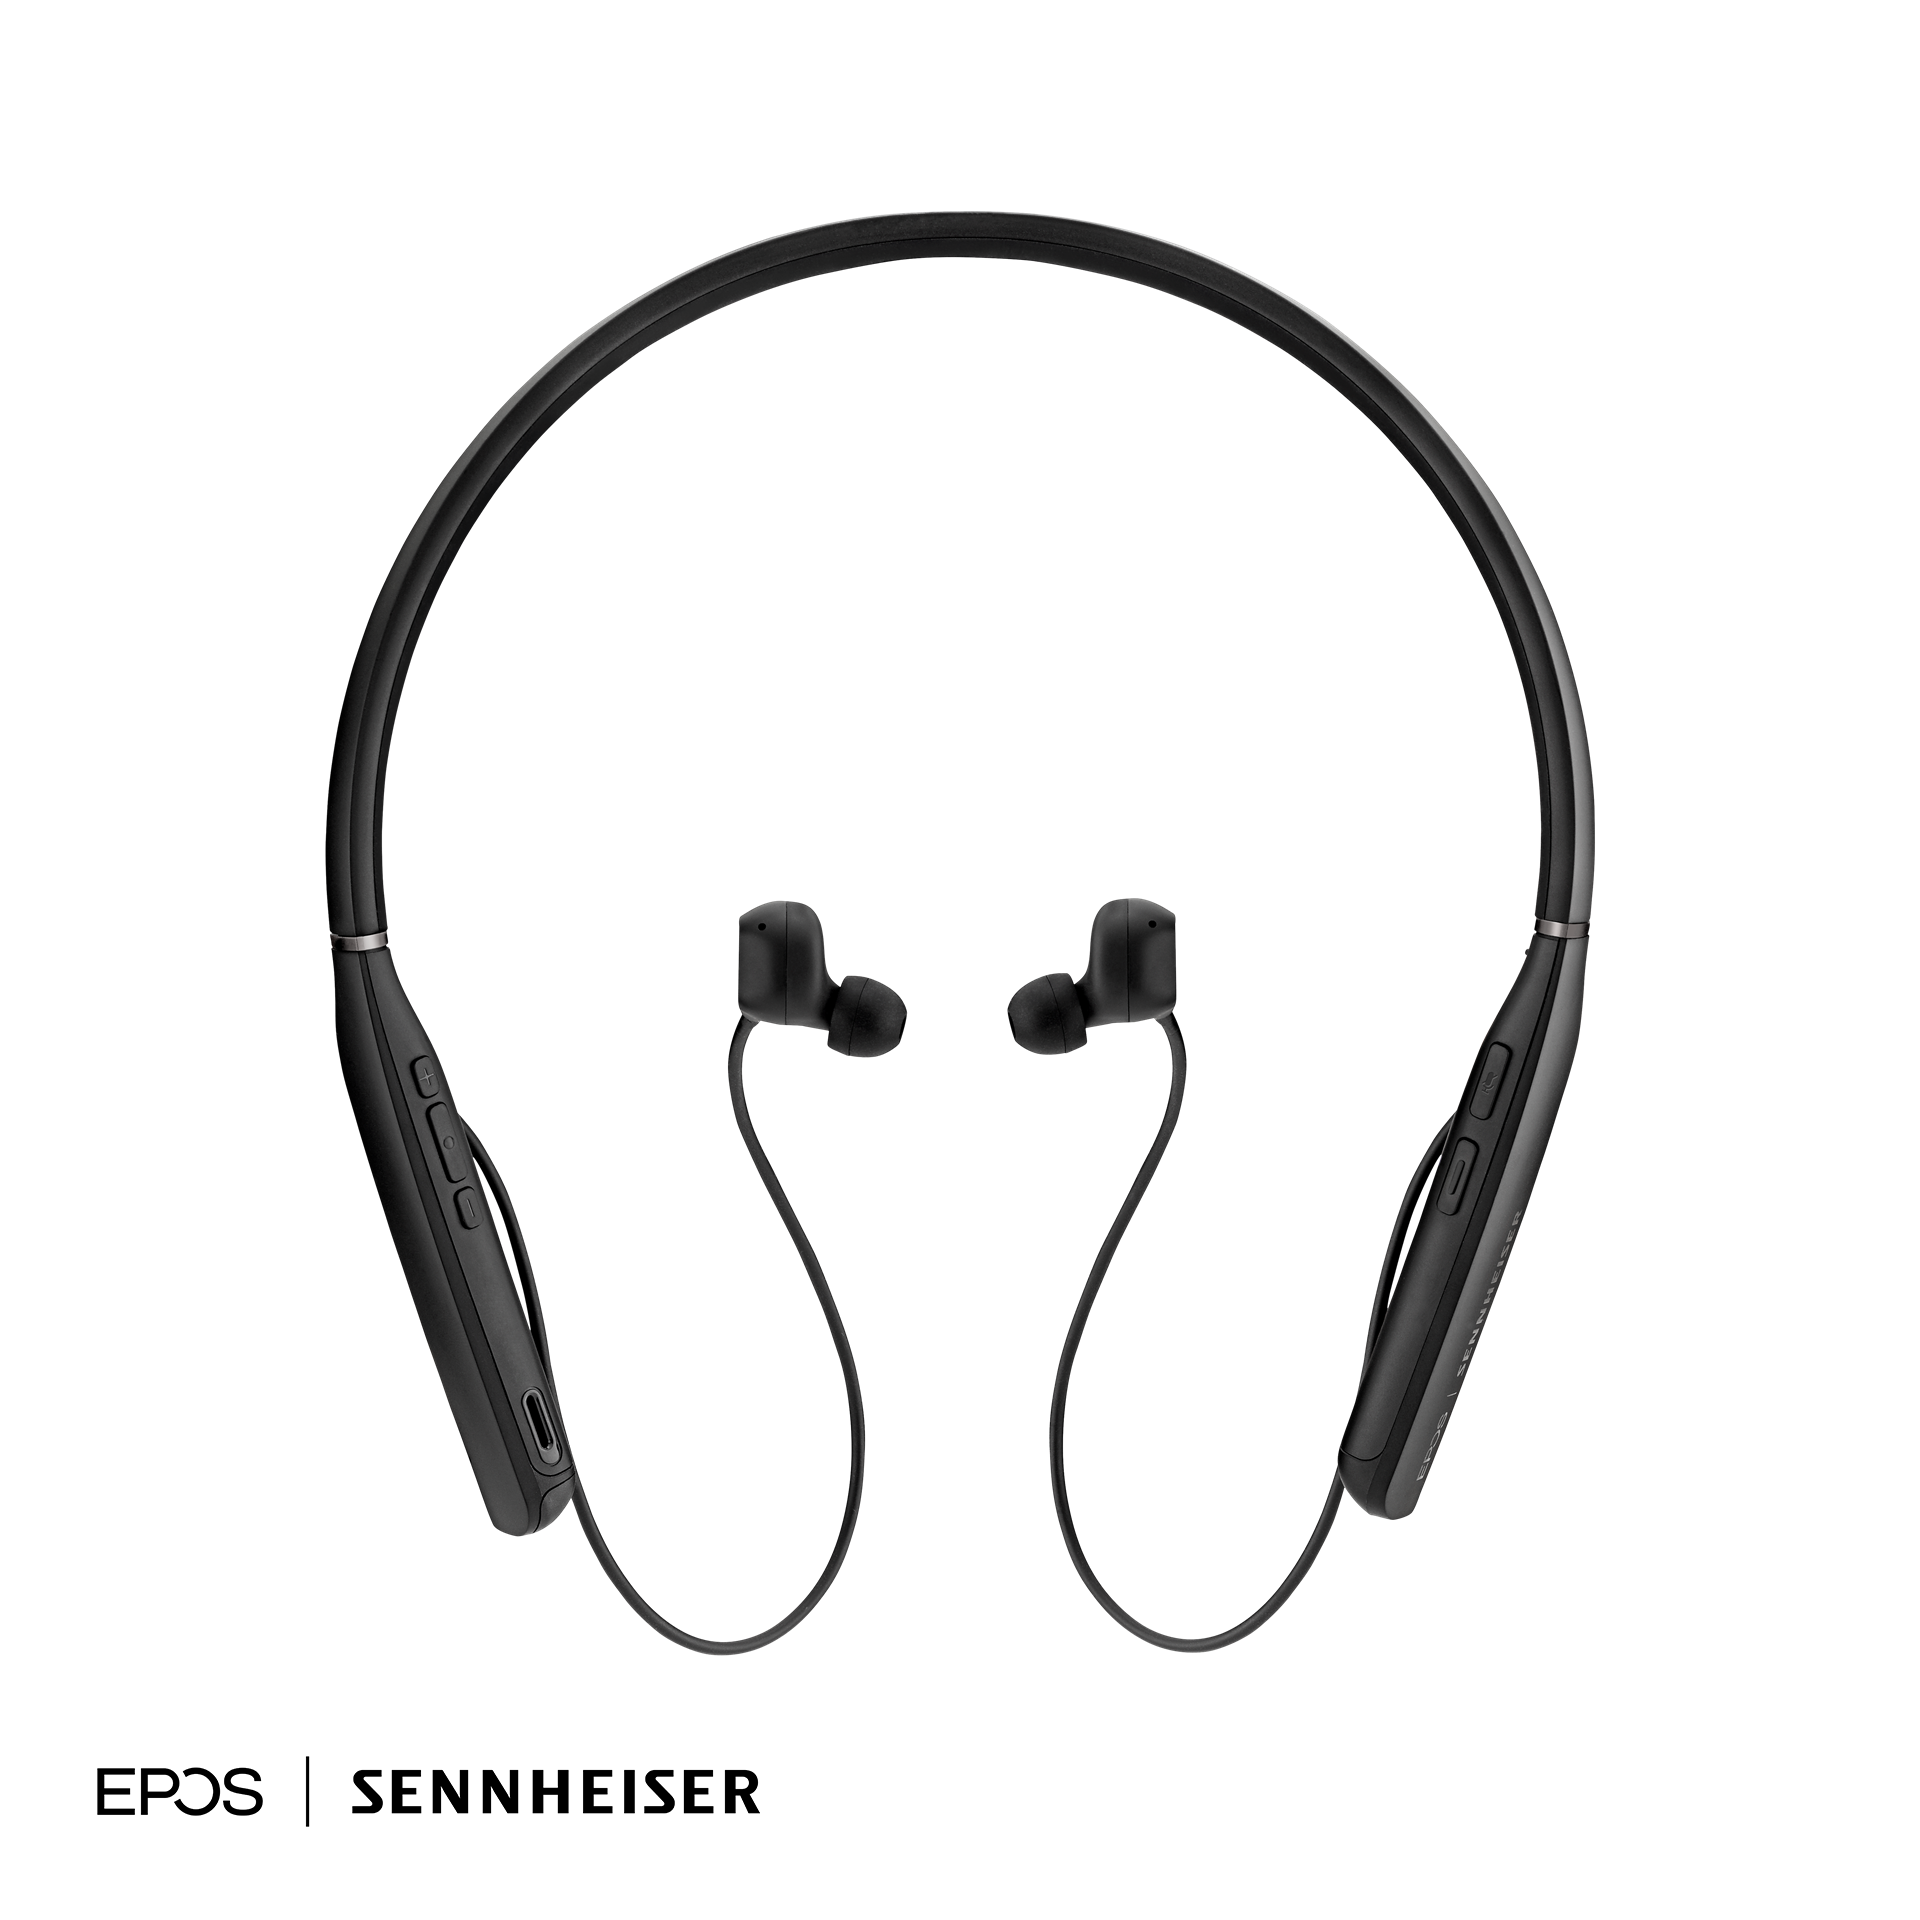 EP-1000204 Bluetooth in-ear headset, with neckband, USB-C BT dongle and Active Noise Cancellation. UC optimized solution.